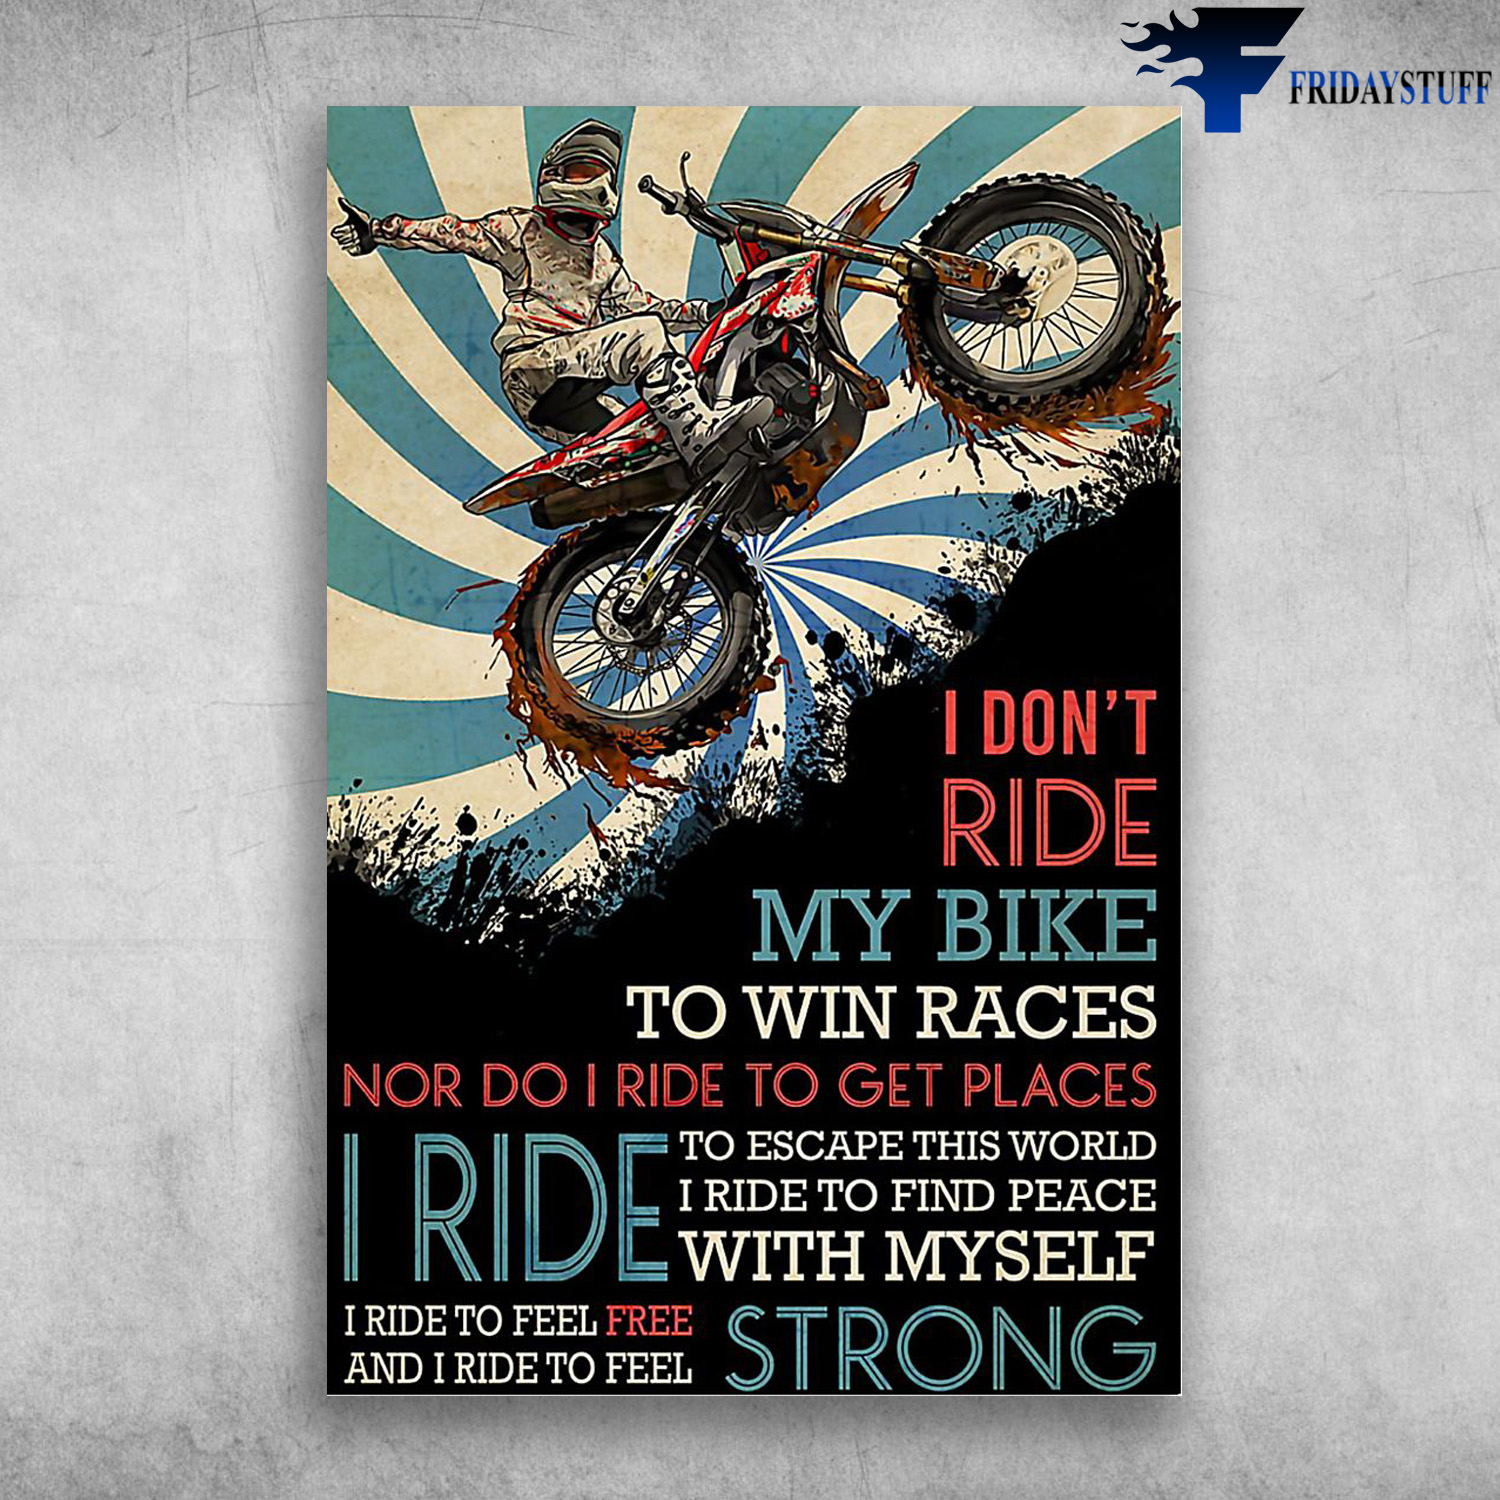 Man Riding Motorbike - I Don't Ride My Bike To Win Races, I Ride To Escape This World